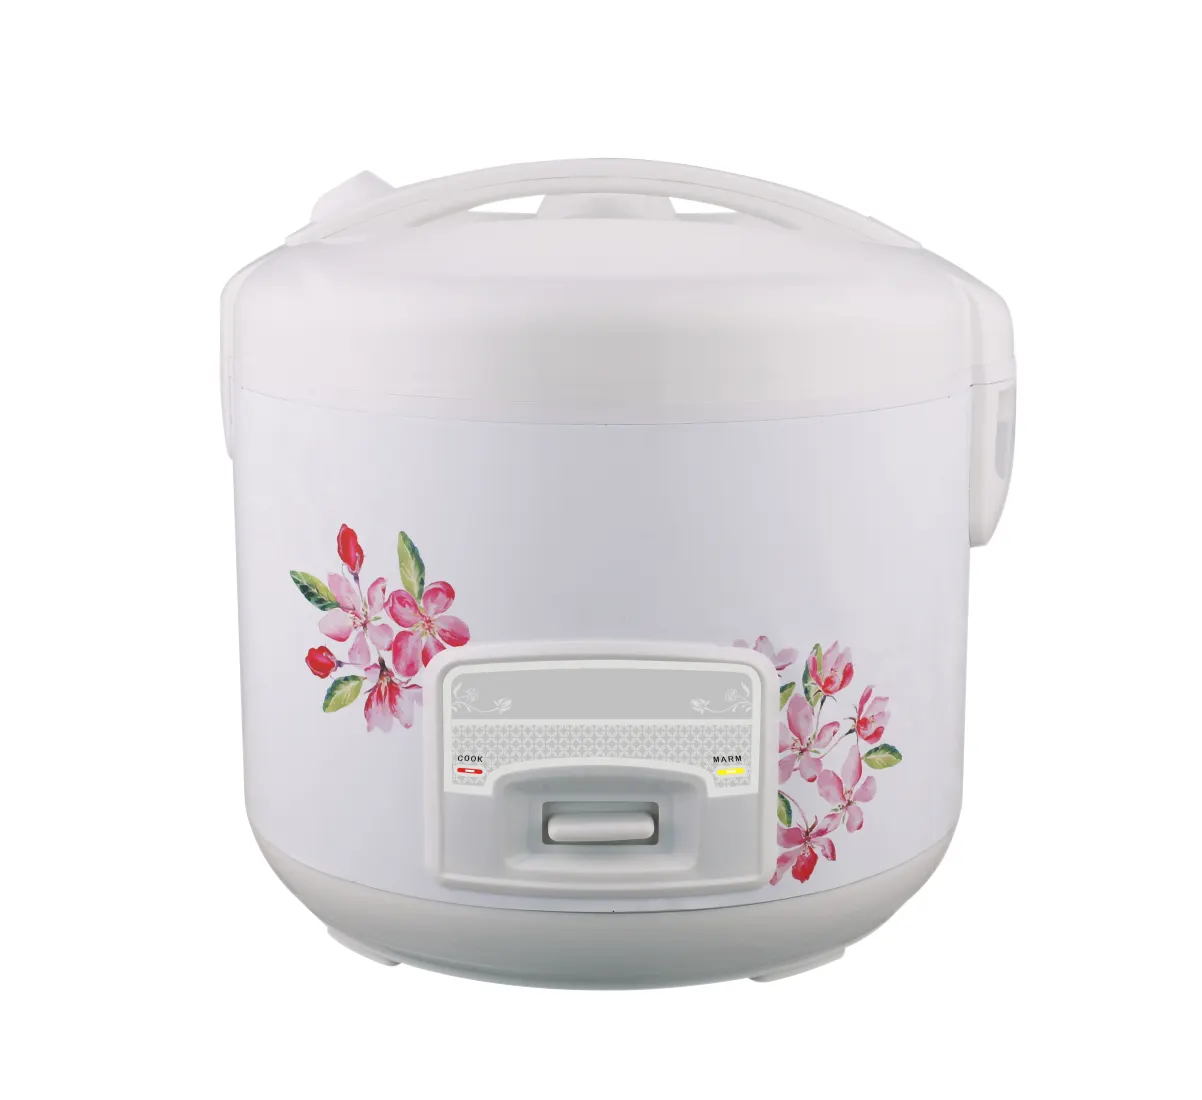 2020 NEW kitchen home appliances PINK flower body Rice Cooking Machine 1.8L Electric Rice cooker